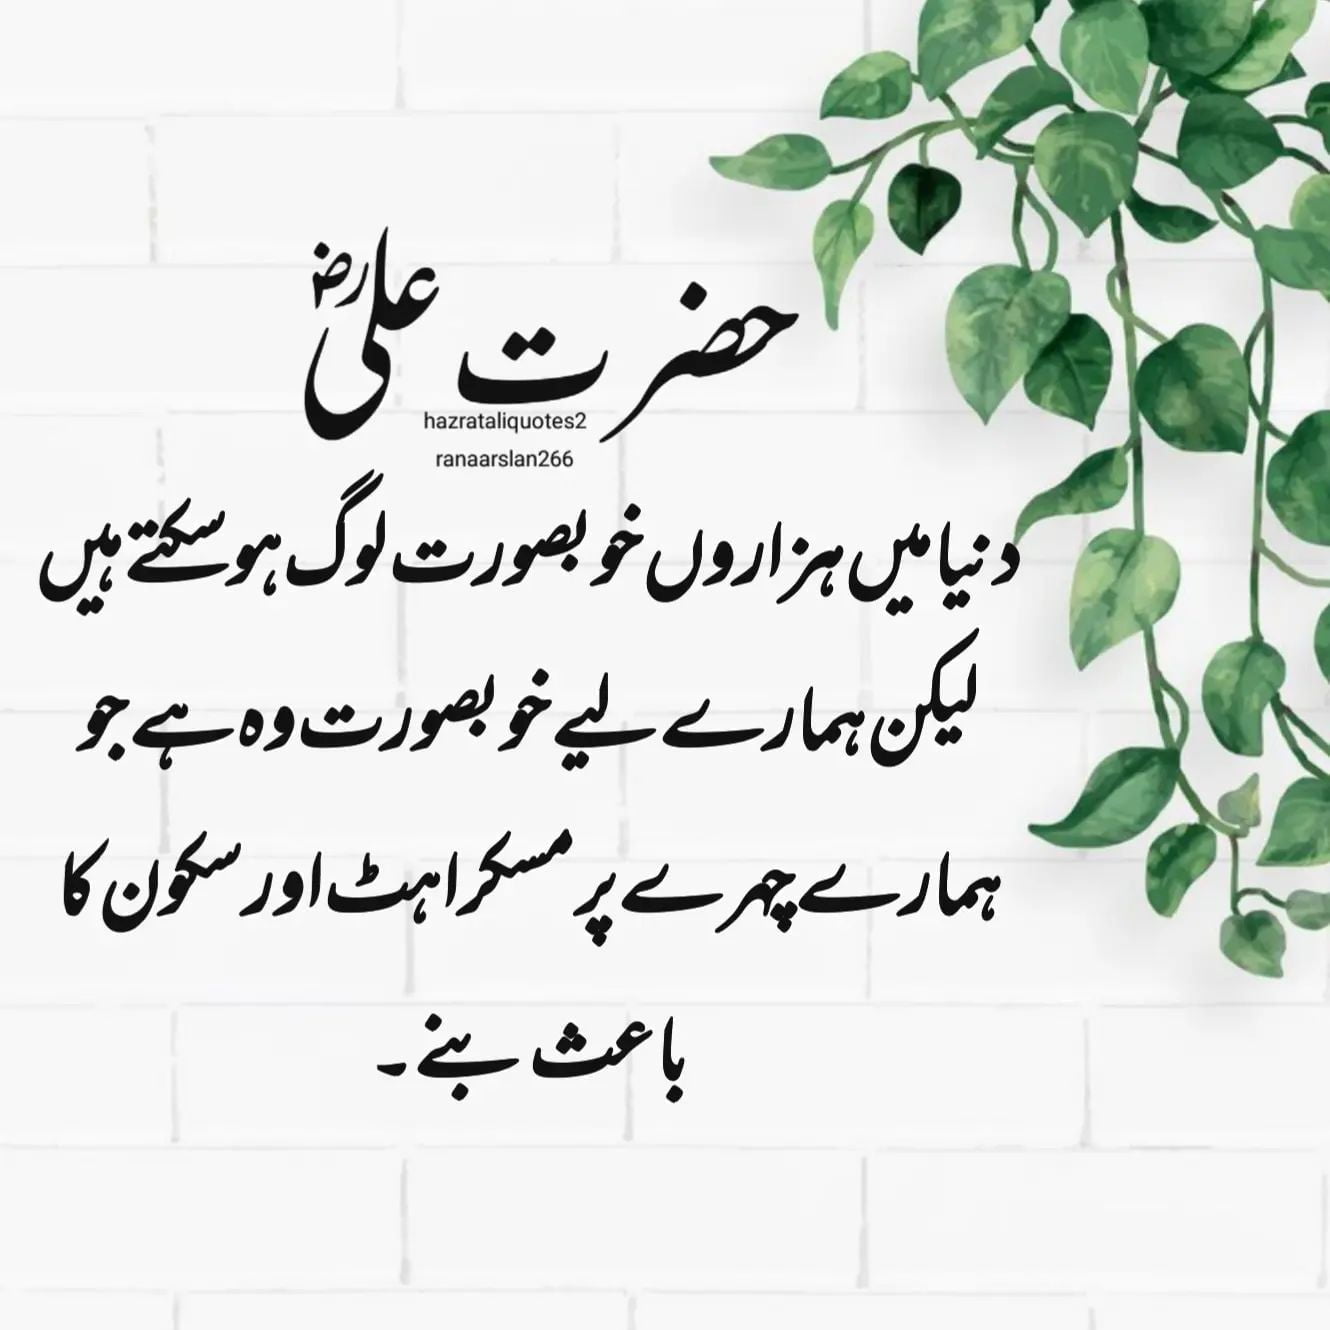 100 Best Hazrat Ali Quotes in Urdu With Images Sayings Life, Love, Friends and Relations